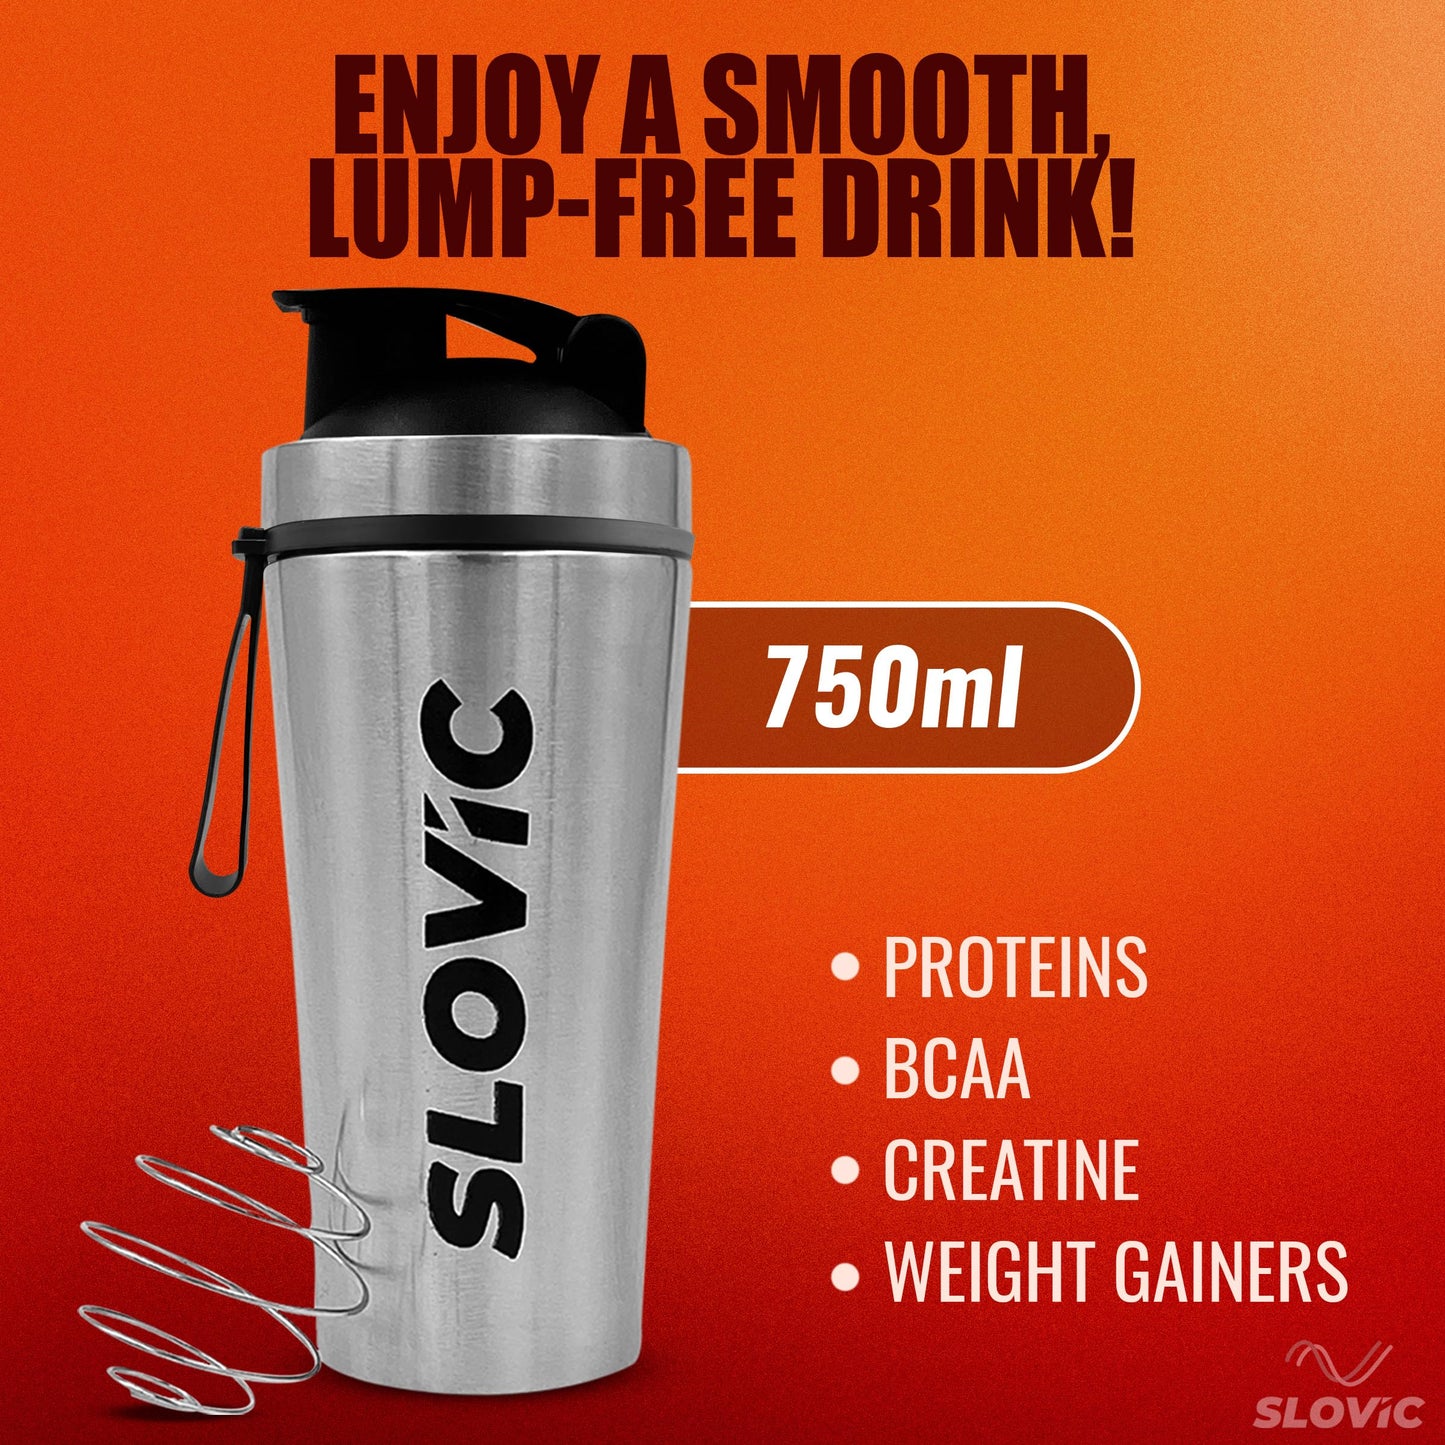 SLOVIC Steel Shaker for Protein Shake, Gym Bottles for Men, Odor free Protein Shaker Bottles for Protein Shake, Leakproof Stainless Steel Shaker Bottles for Gym